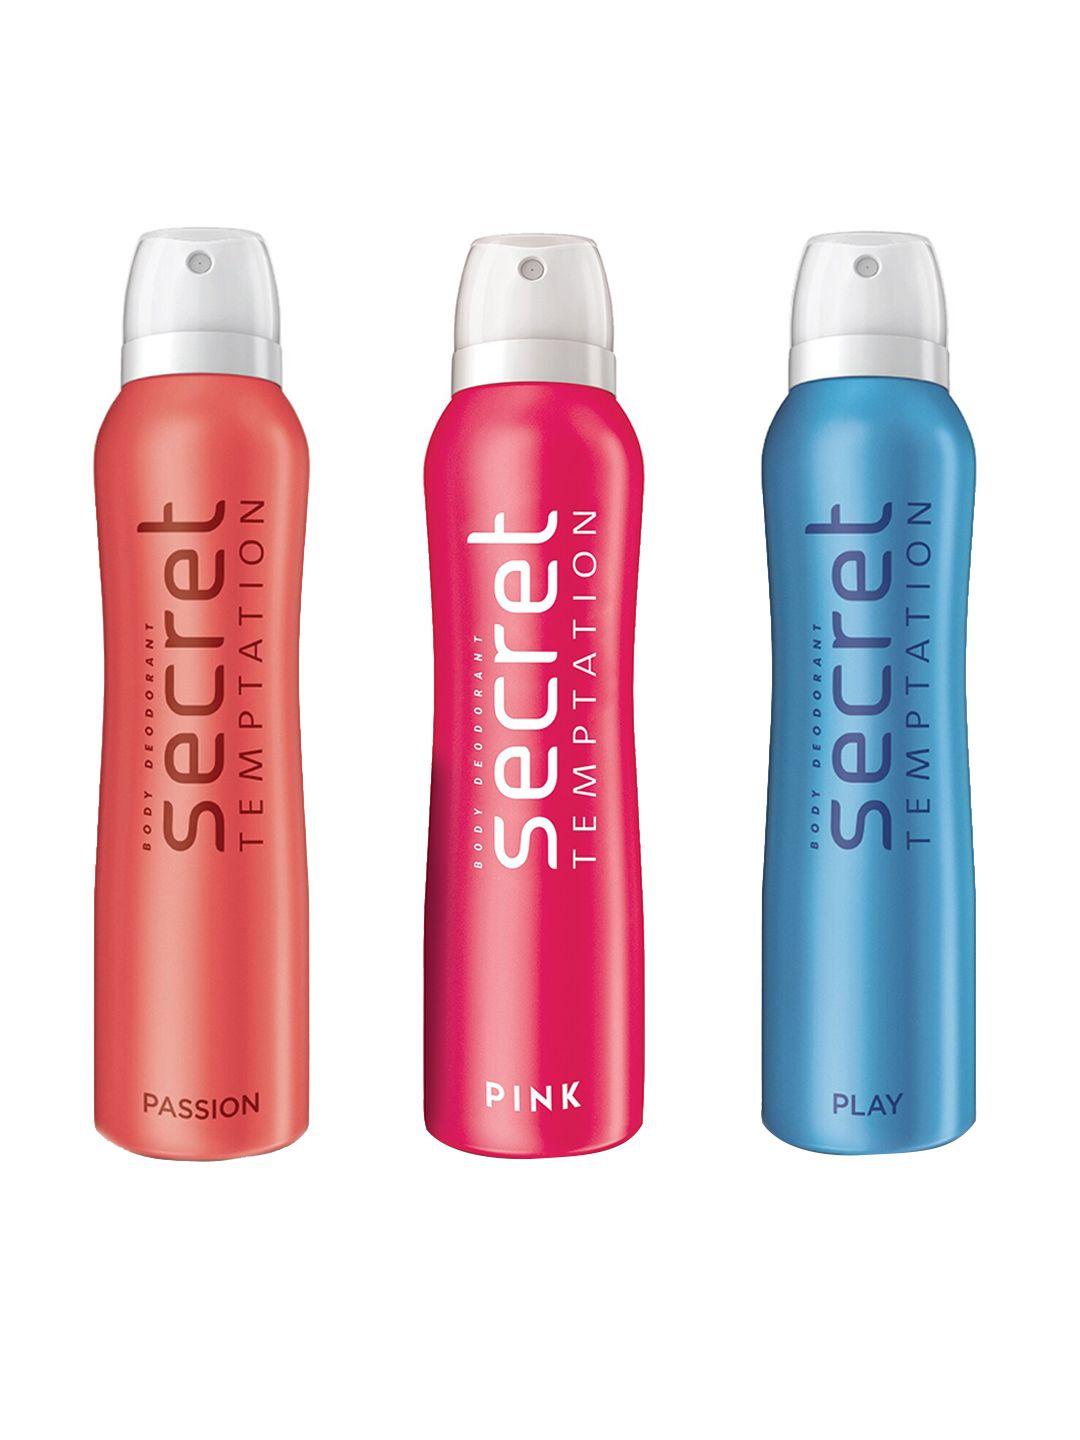 secret temptation set of 3 deodorant - passion, play and pink 150ml